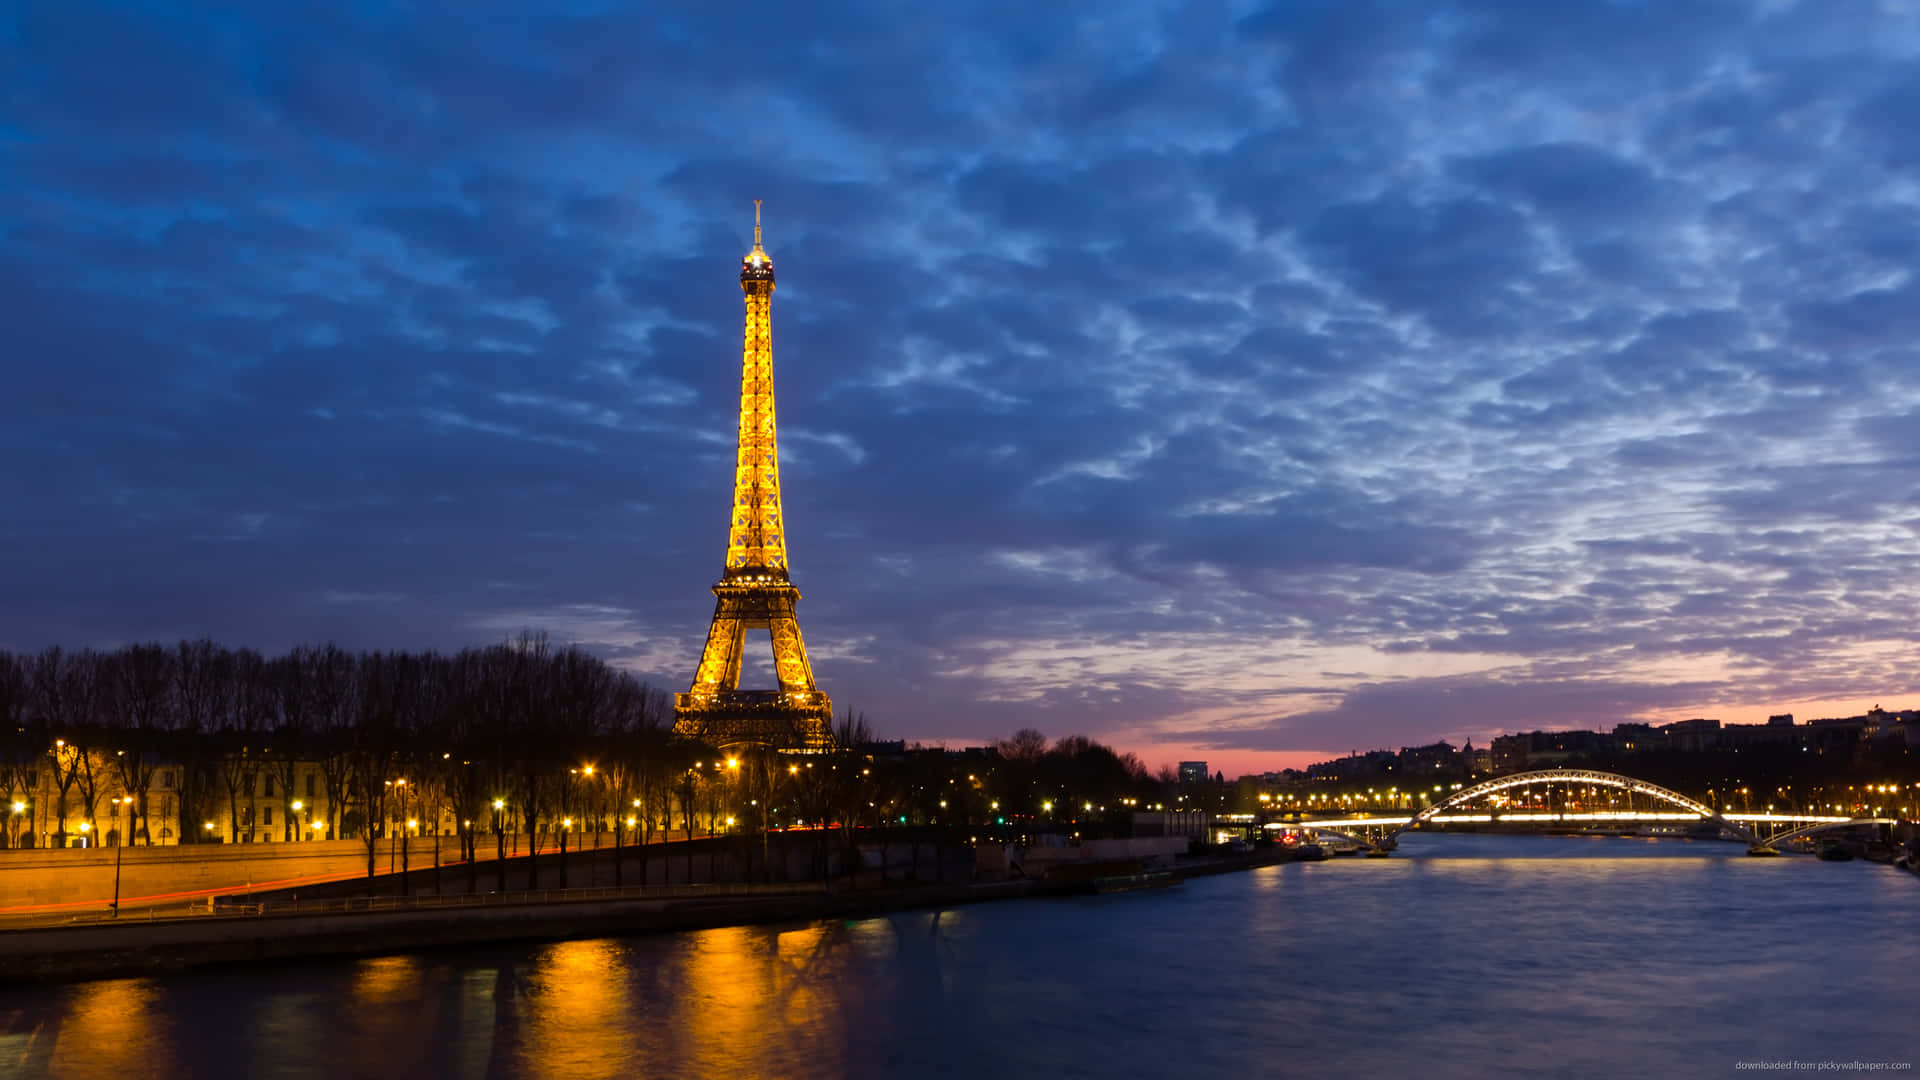 Eiffel Tower At Night Landscape Picture